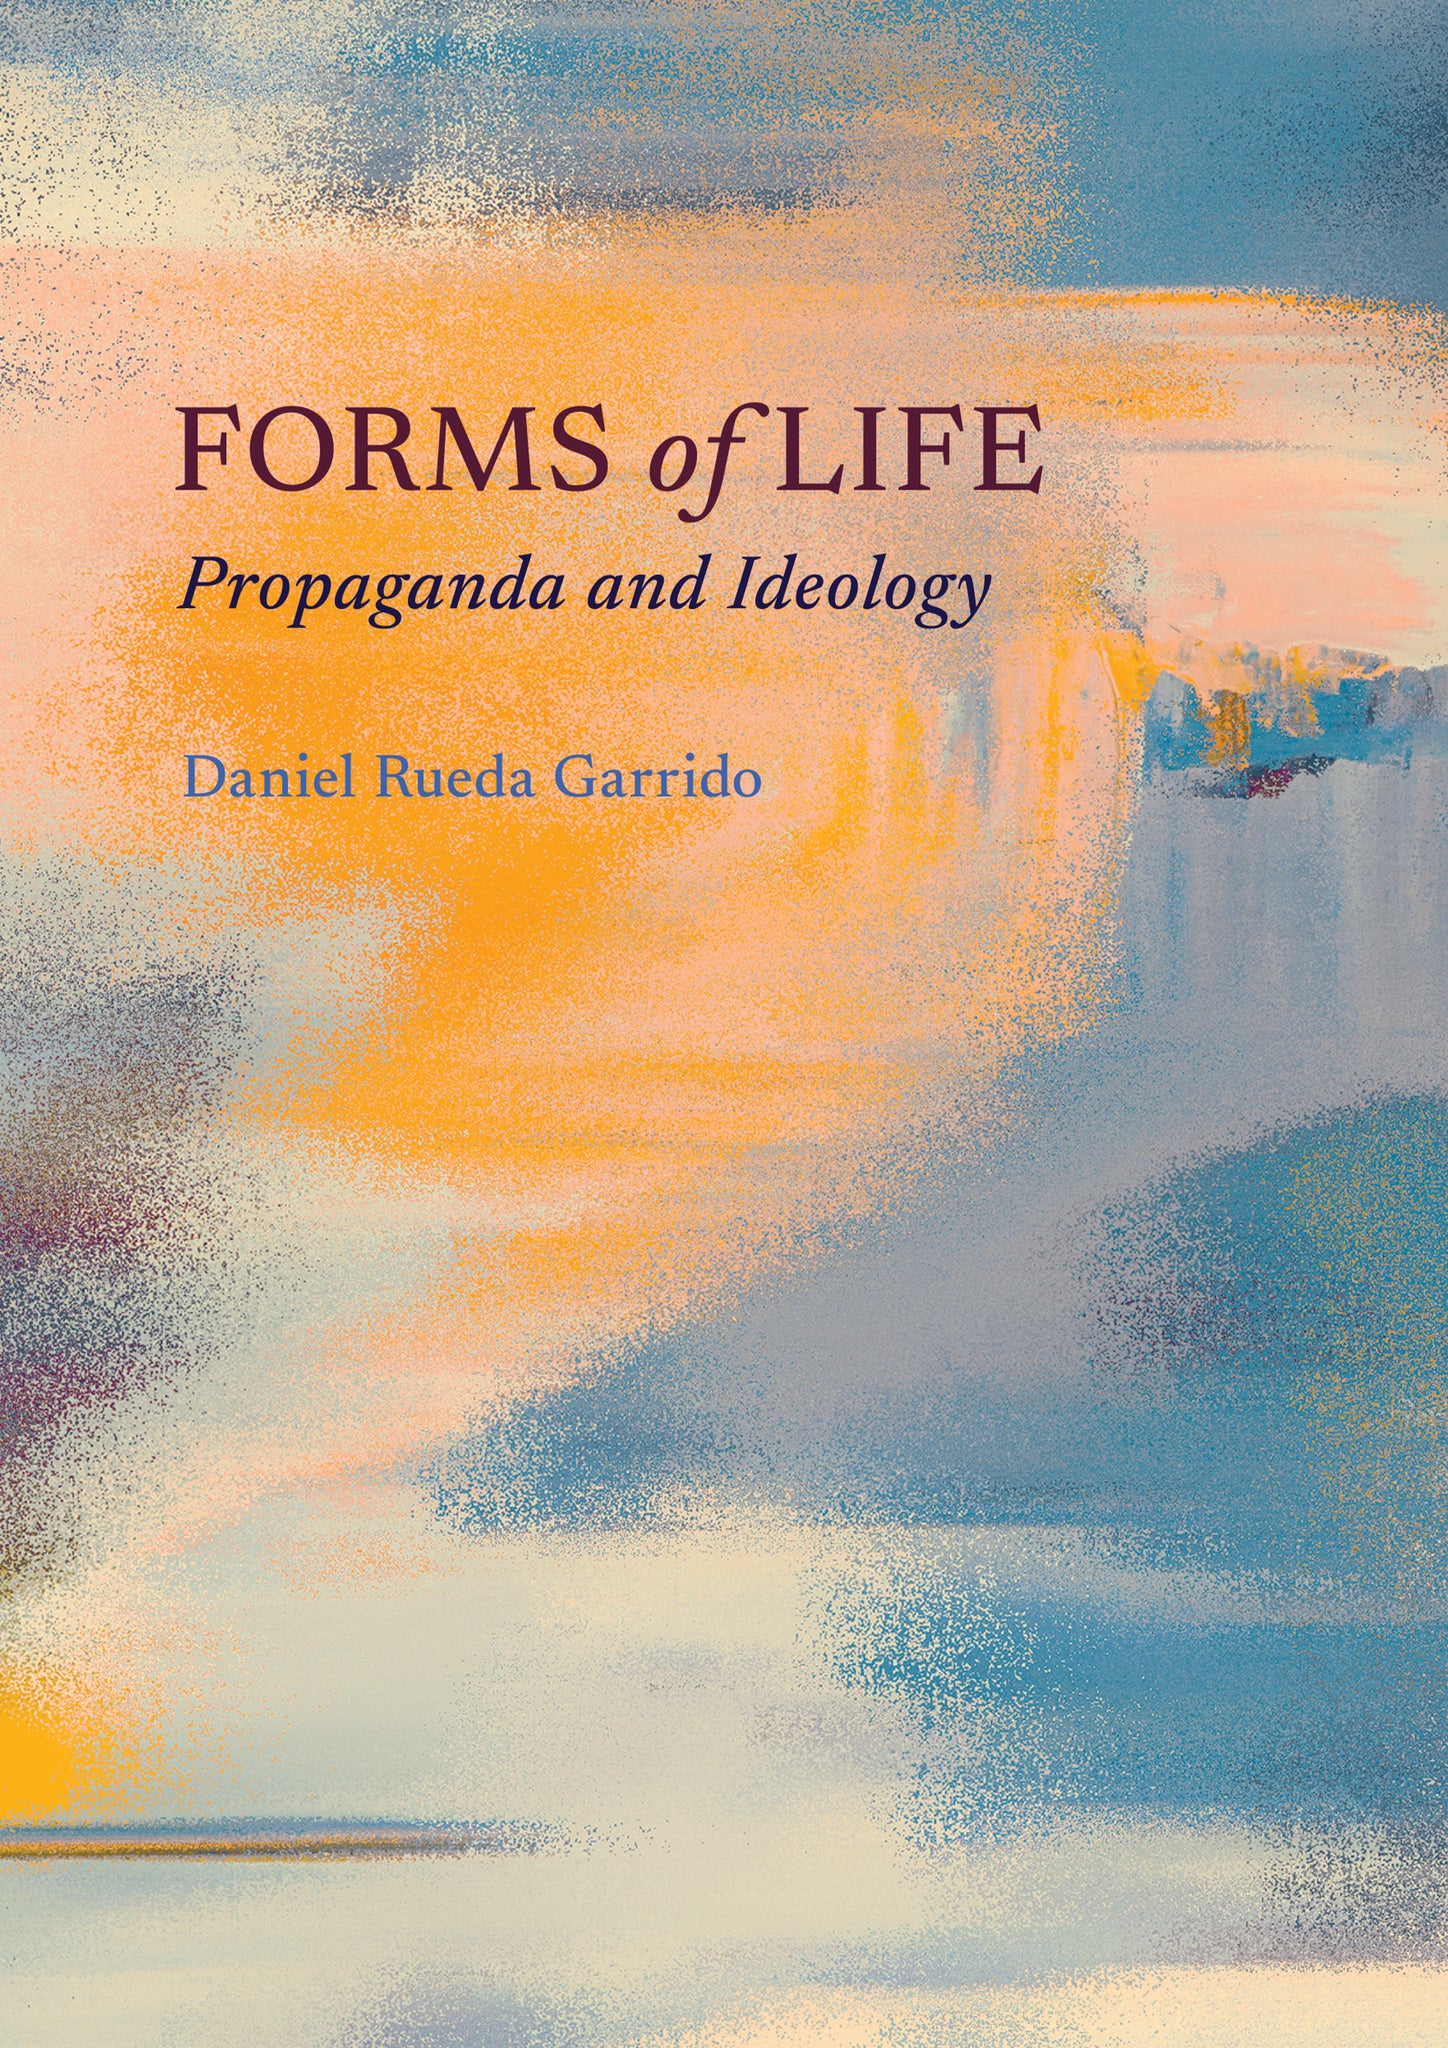 Forms of Life: Propaganda and Ideology